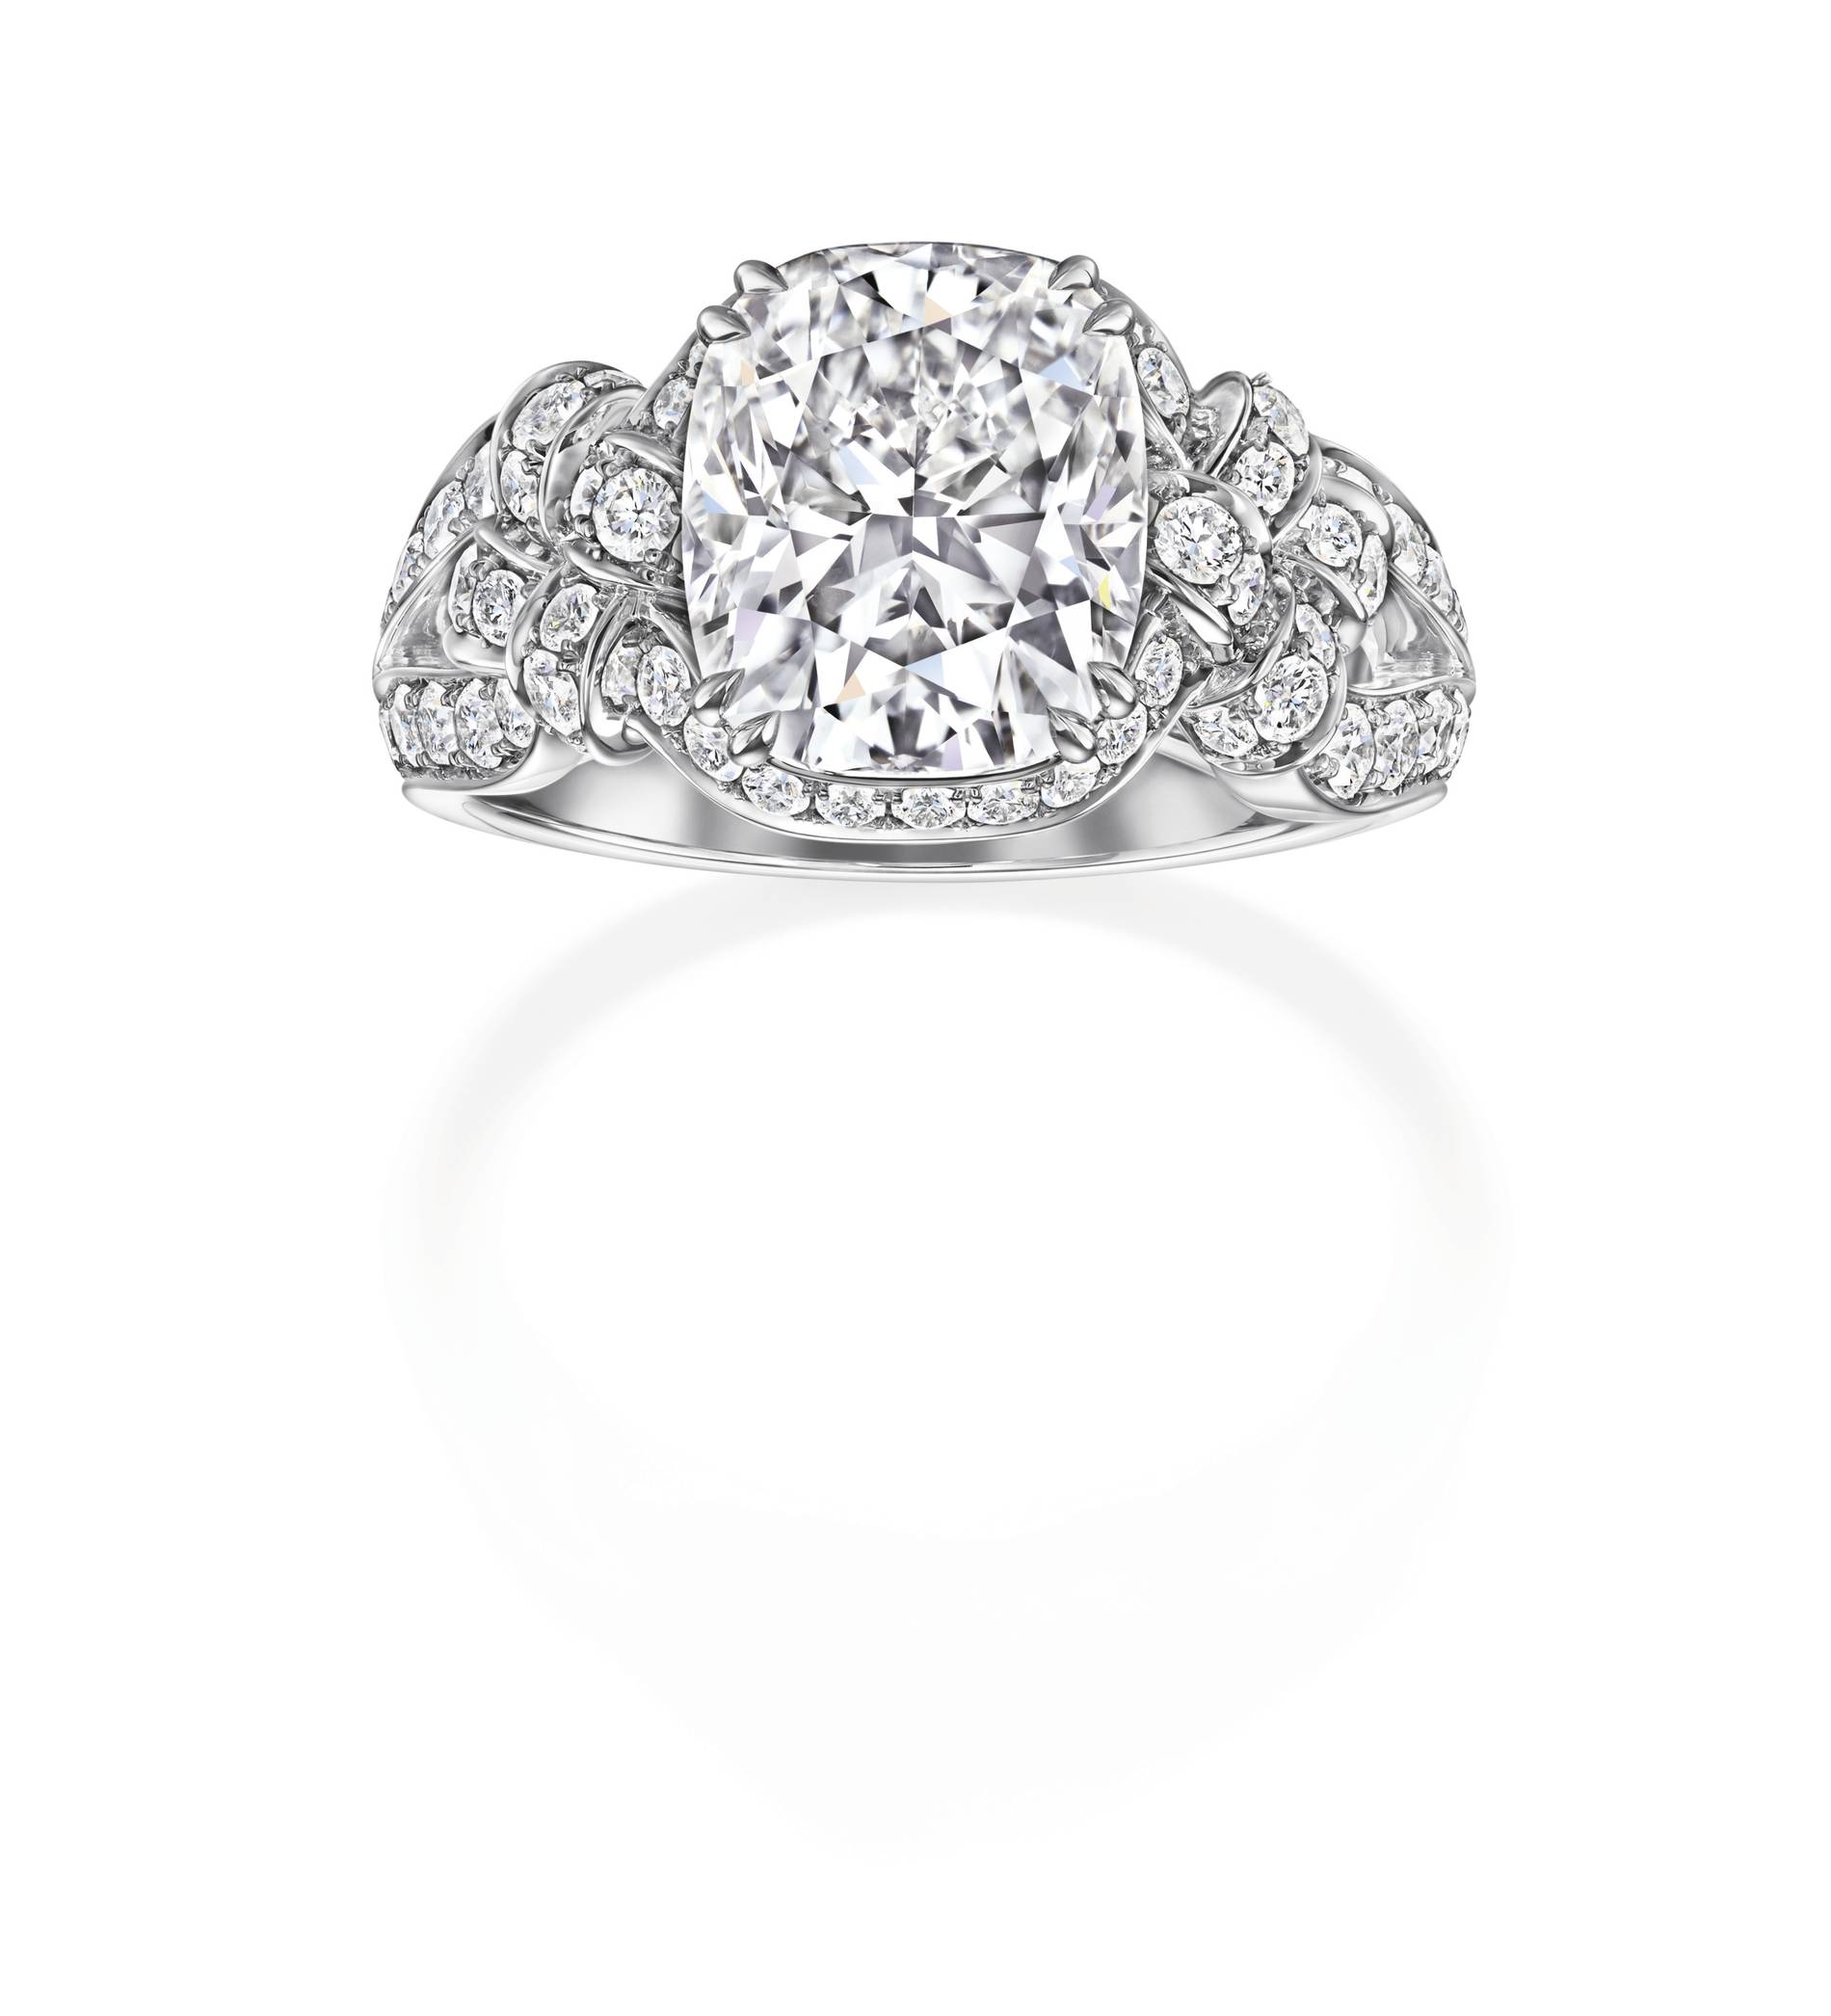 Harry Winston Bridal Couture ring collection